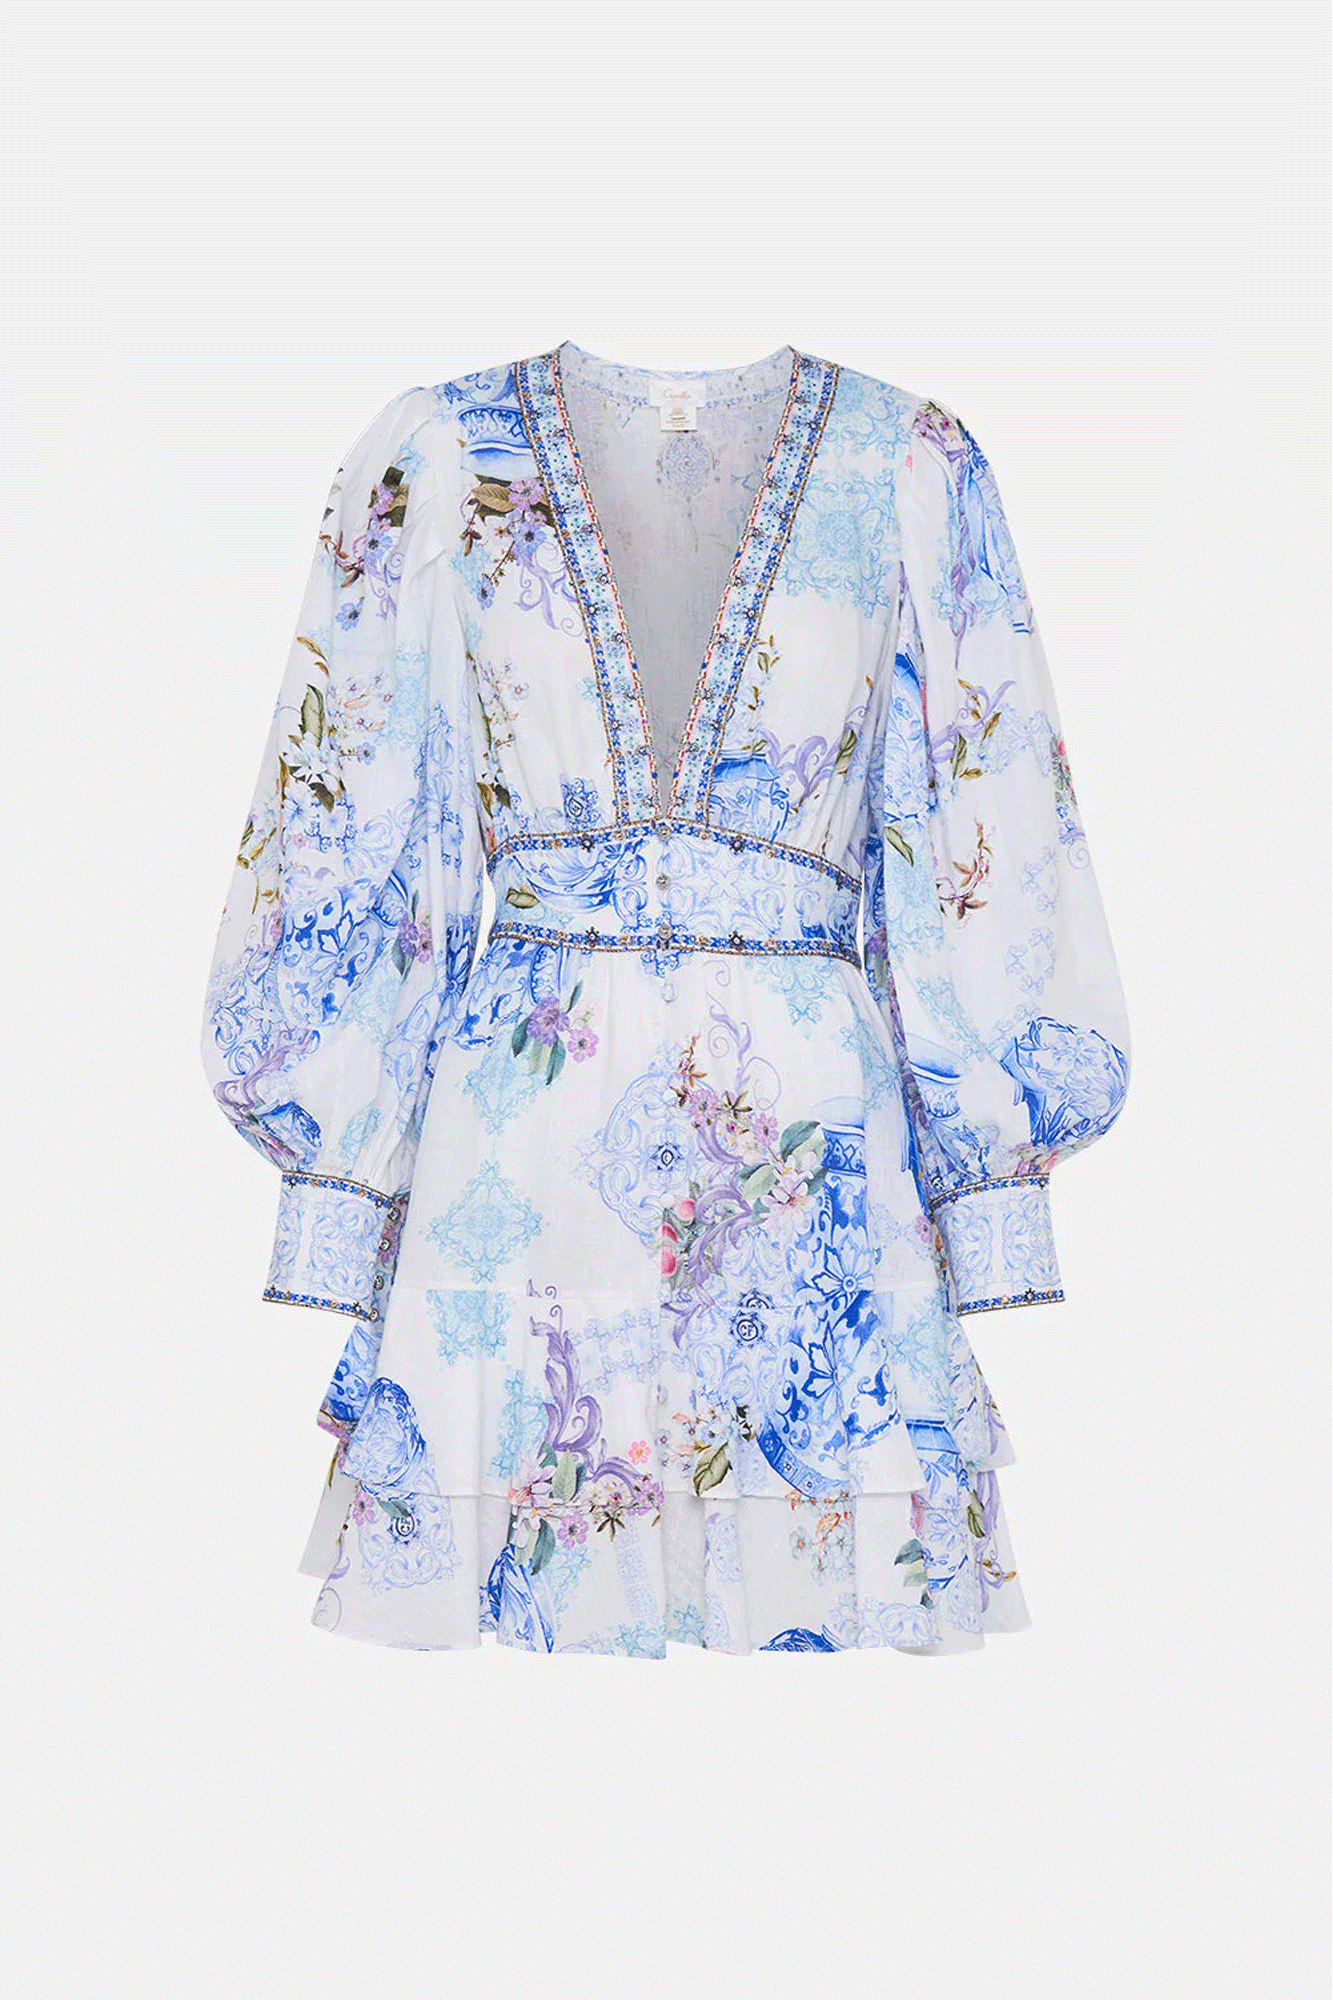 This luxury linen mini dress by Camilla features intricate Italian tile mosaics and delicate pastel florals, balanced with crystal embellishment. It will bring life to any occasion with voluminous blouson sleeves, a low cut v neckline, and dainty button details. The fitted waistband and two-tier skirt ensures a perfect fit, while still offering movement and a touch of drama.